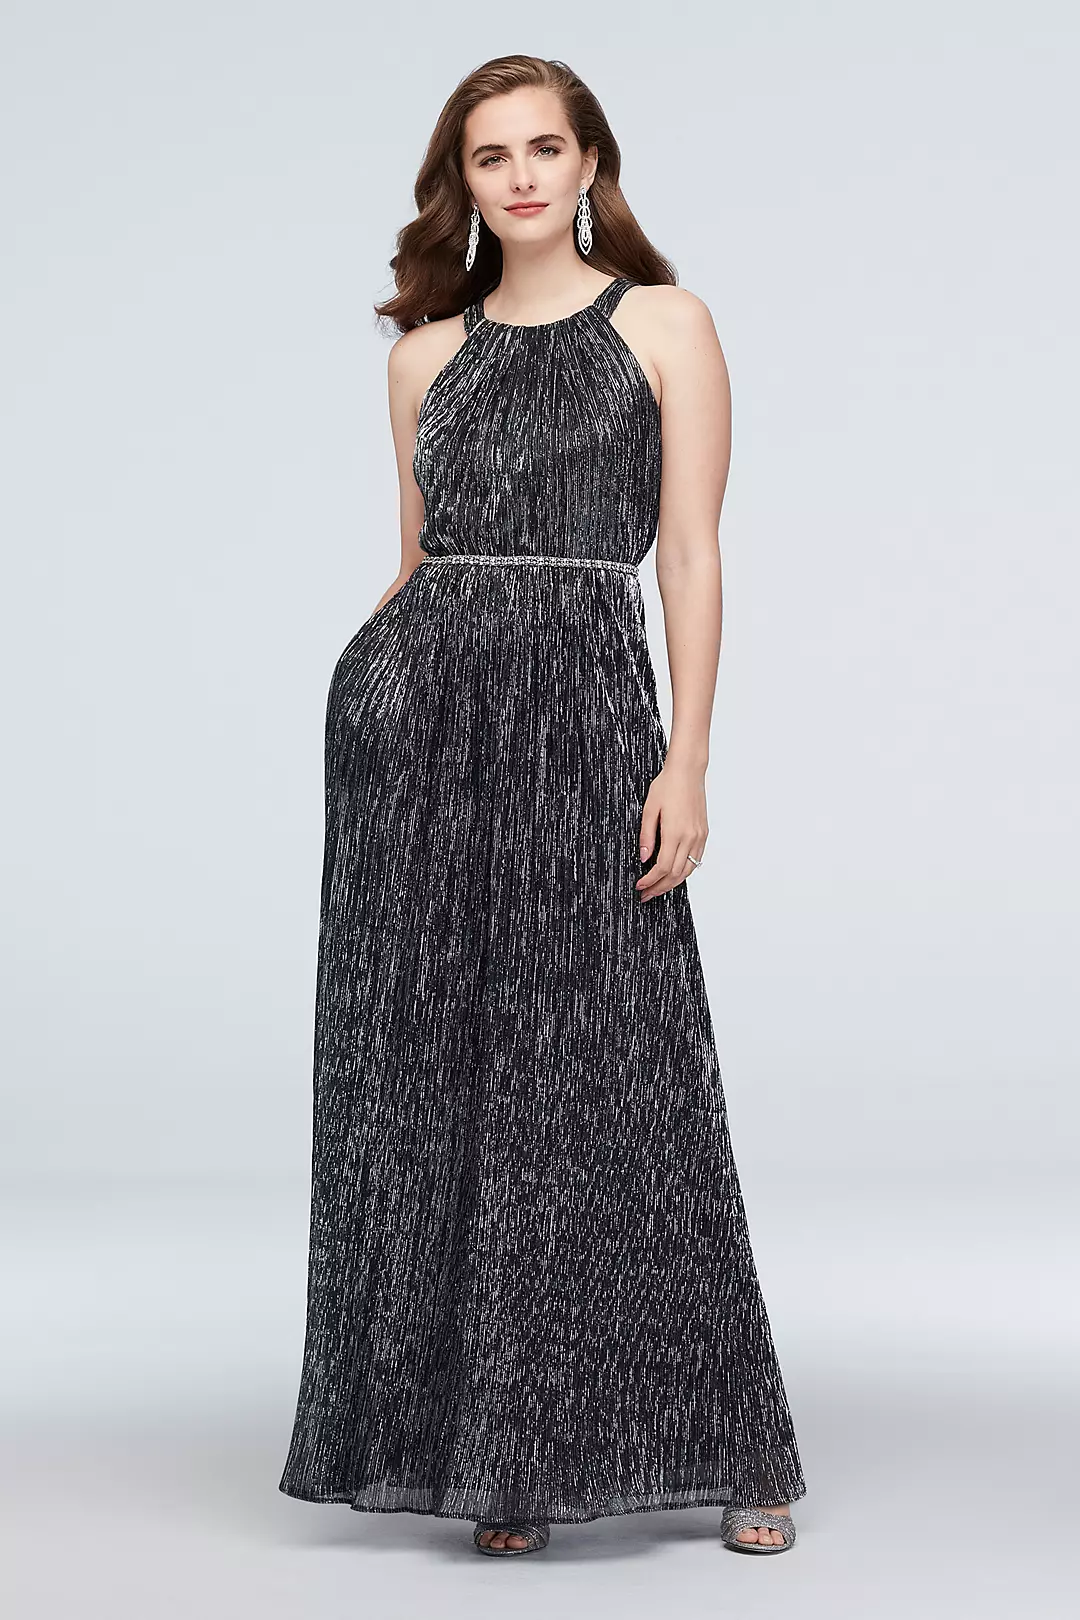 Shimmer Metallic Halter Gown with Beaded Belt Image